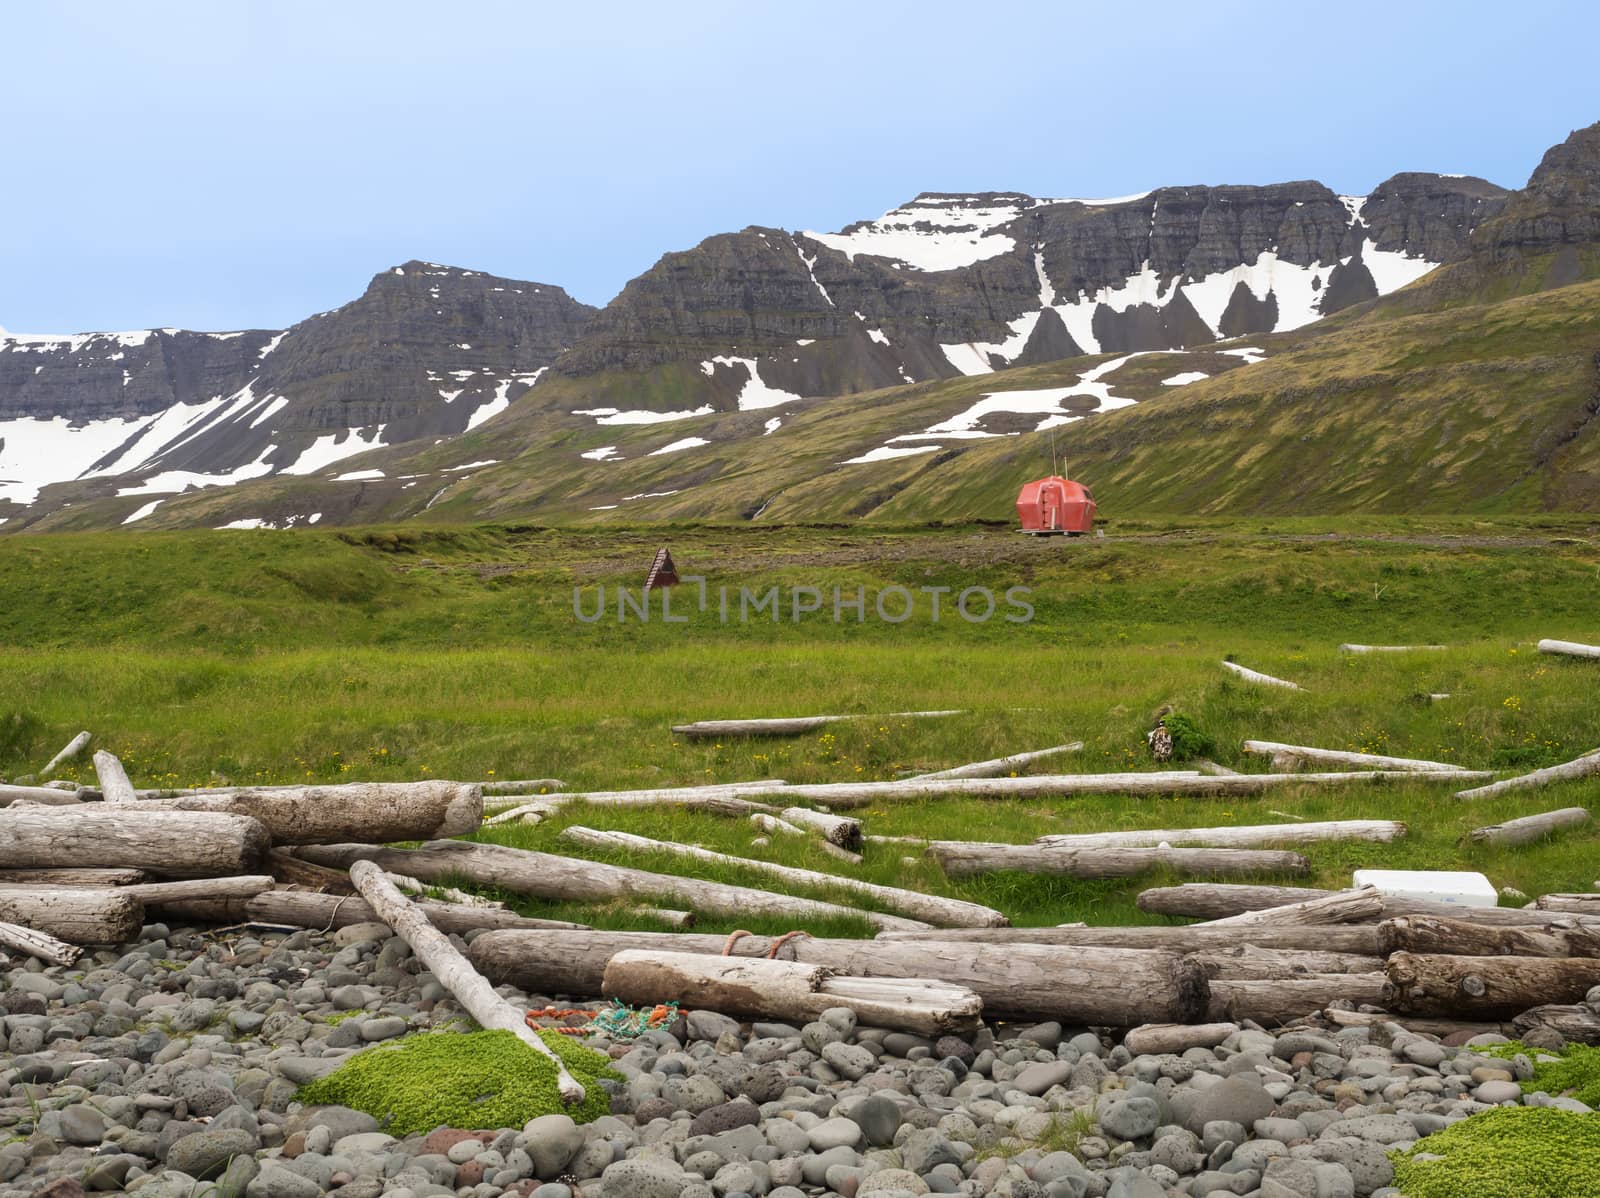 Hloduvik campsite with Red emergency shelter cabin standing on the grass meadow with view on snow coved mountain cliffs, stone and wodd logs, Hornstrandir, west fjords, Iceland